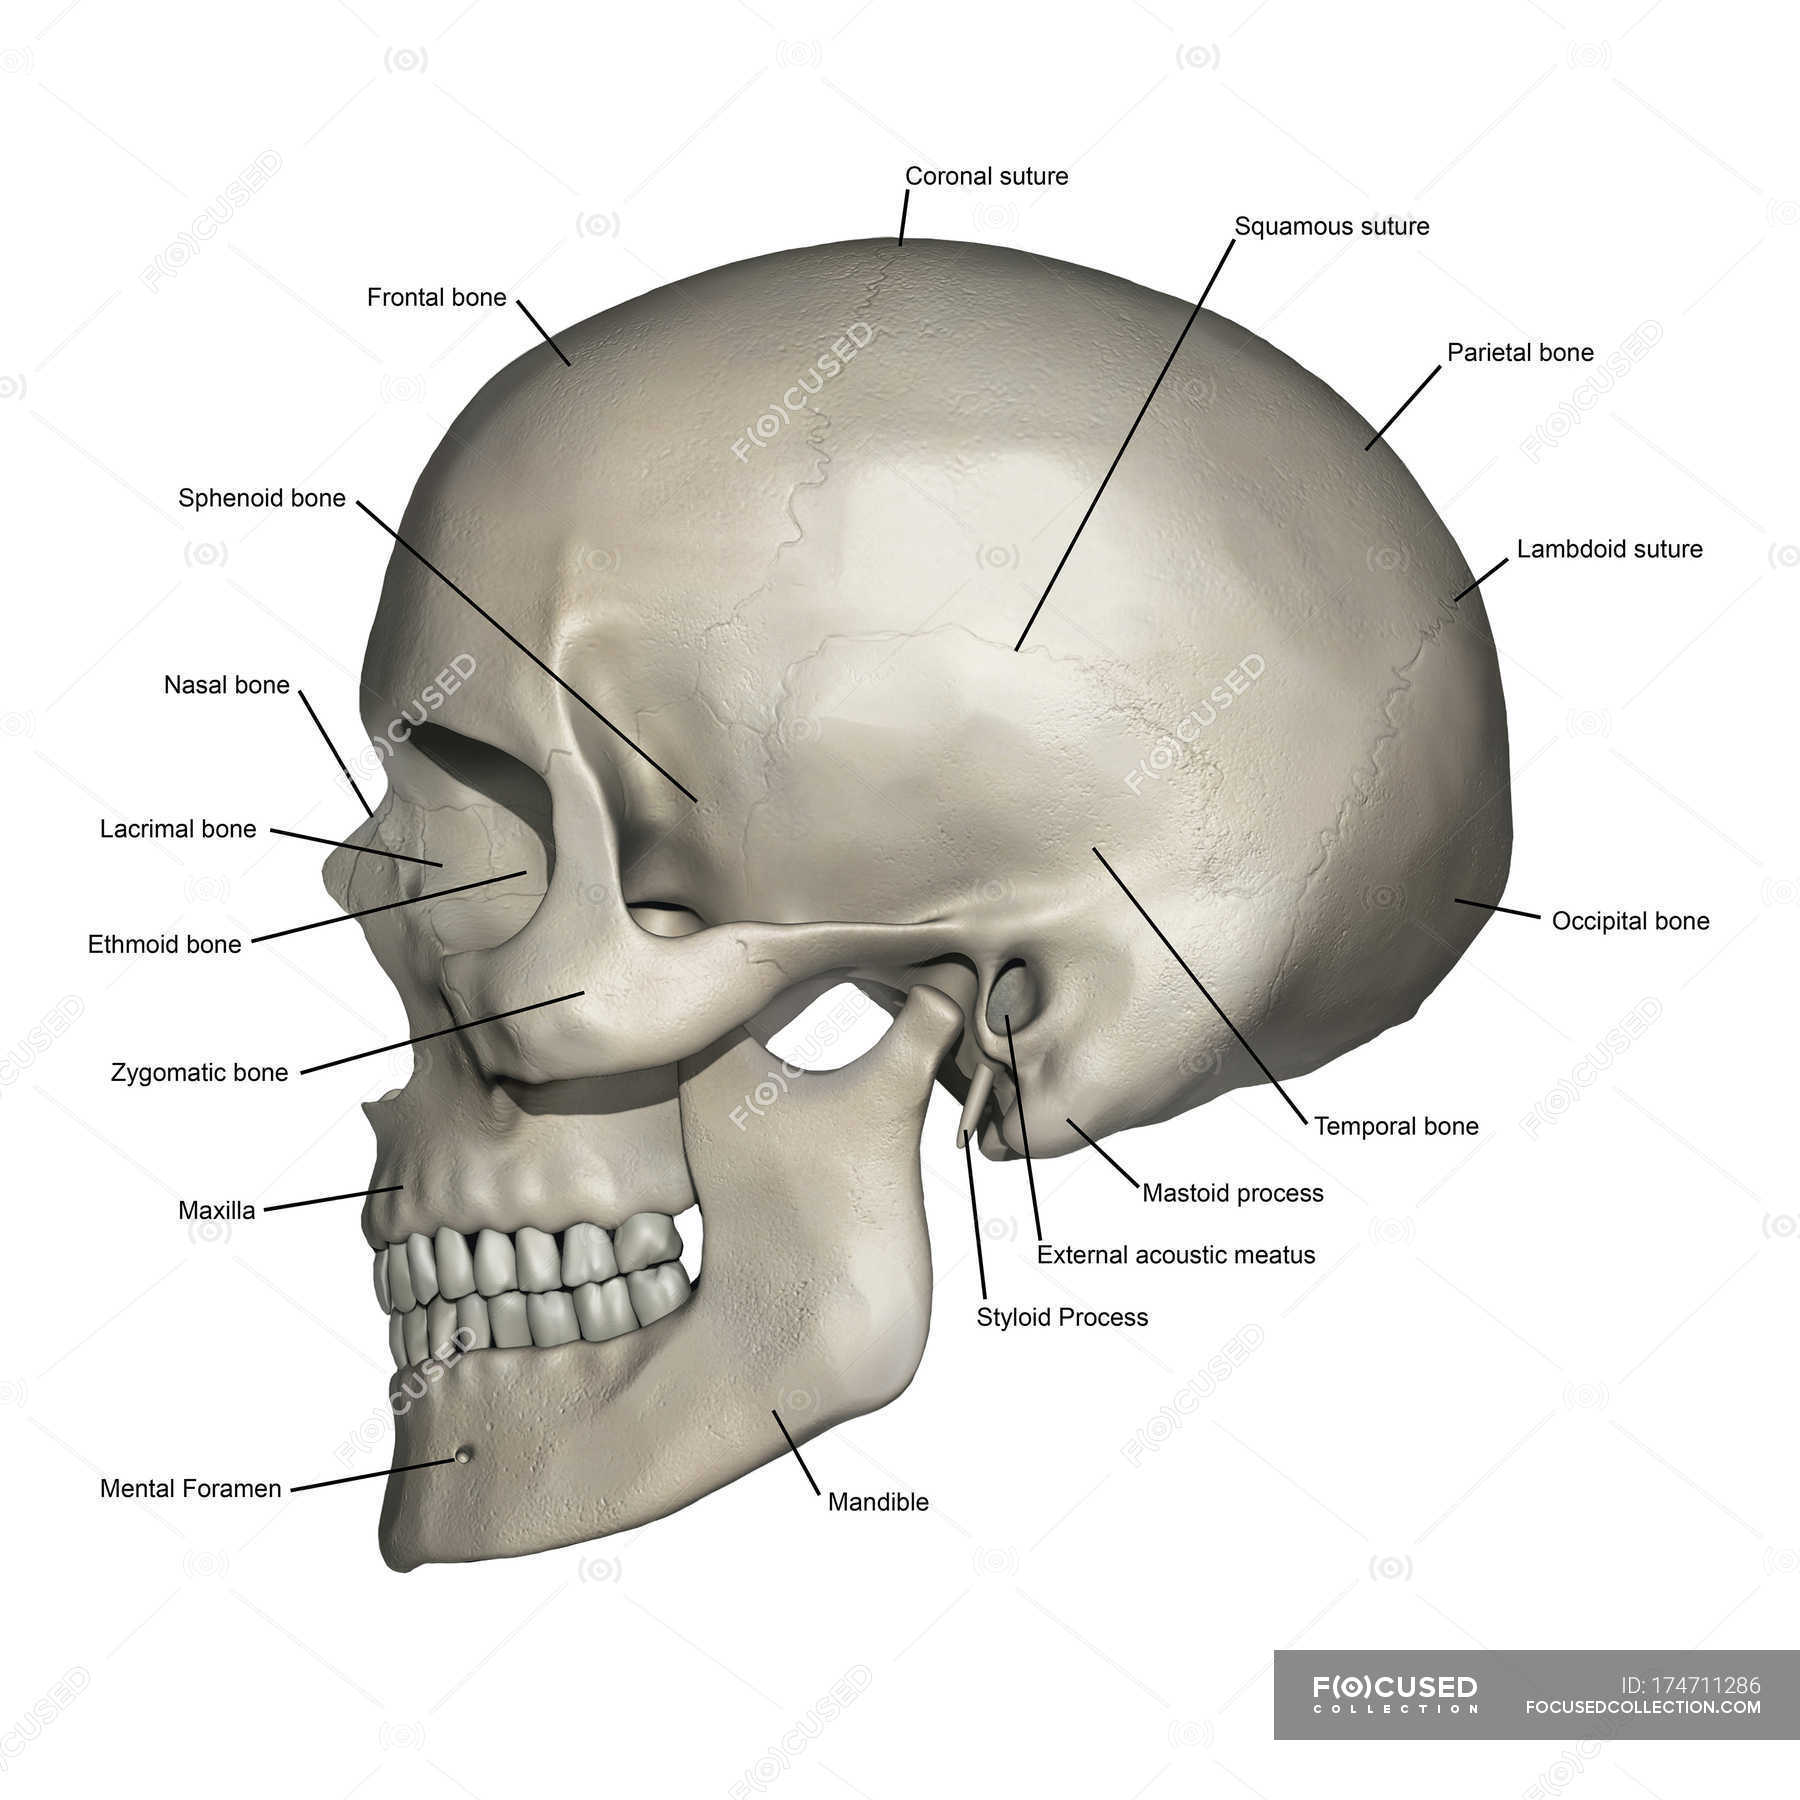 Lateral View Of Human Skull Anatomy With Annotations